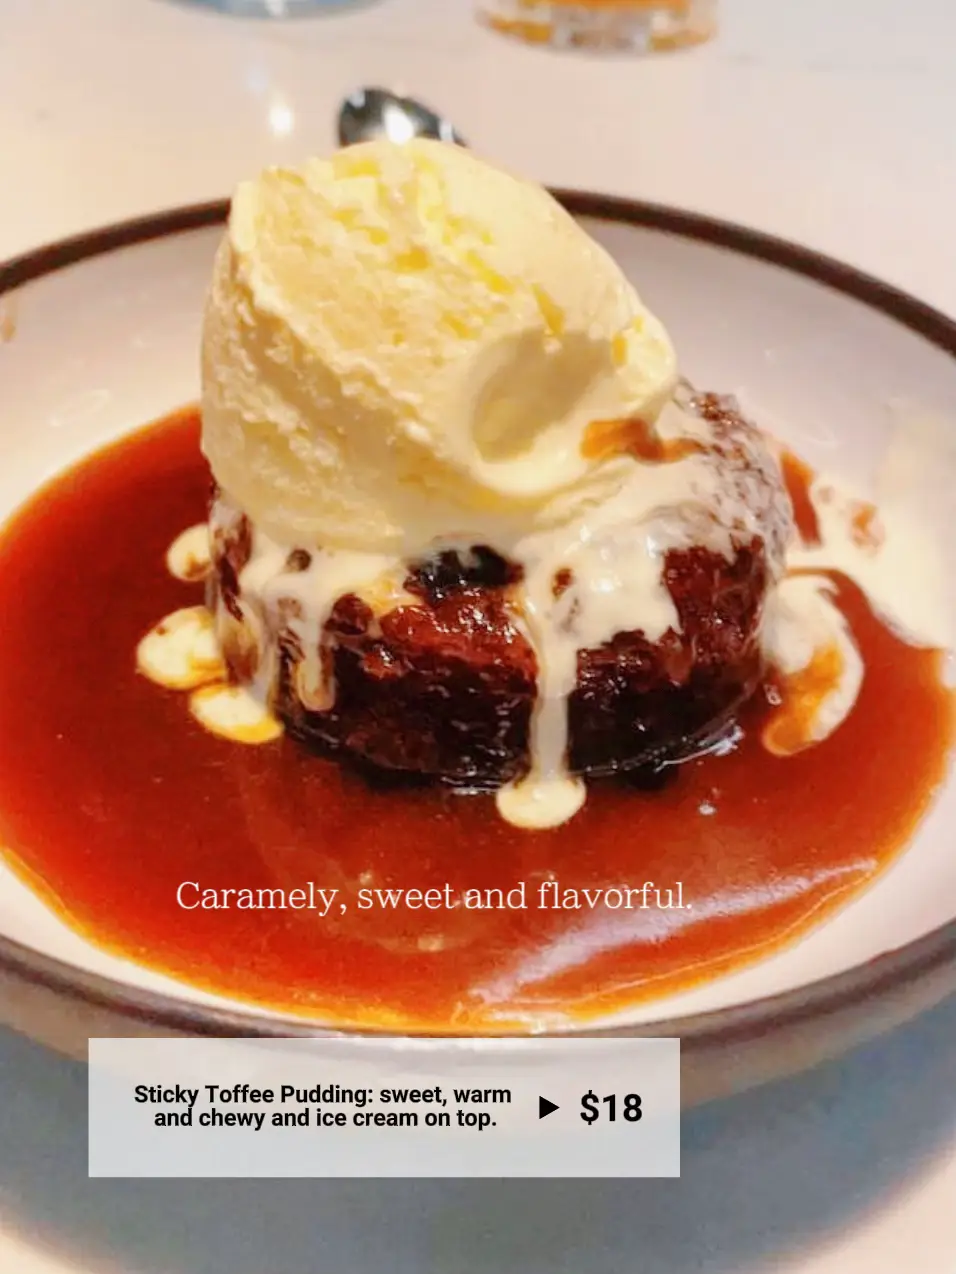  A dessert with a price of $18.